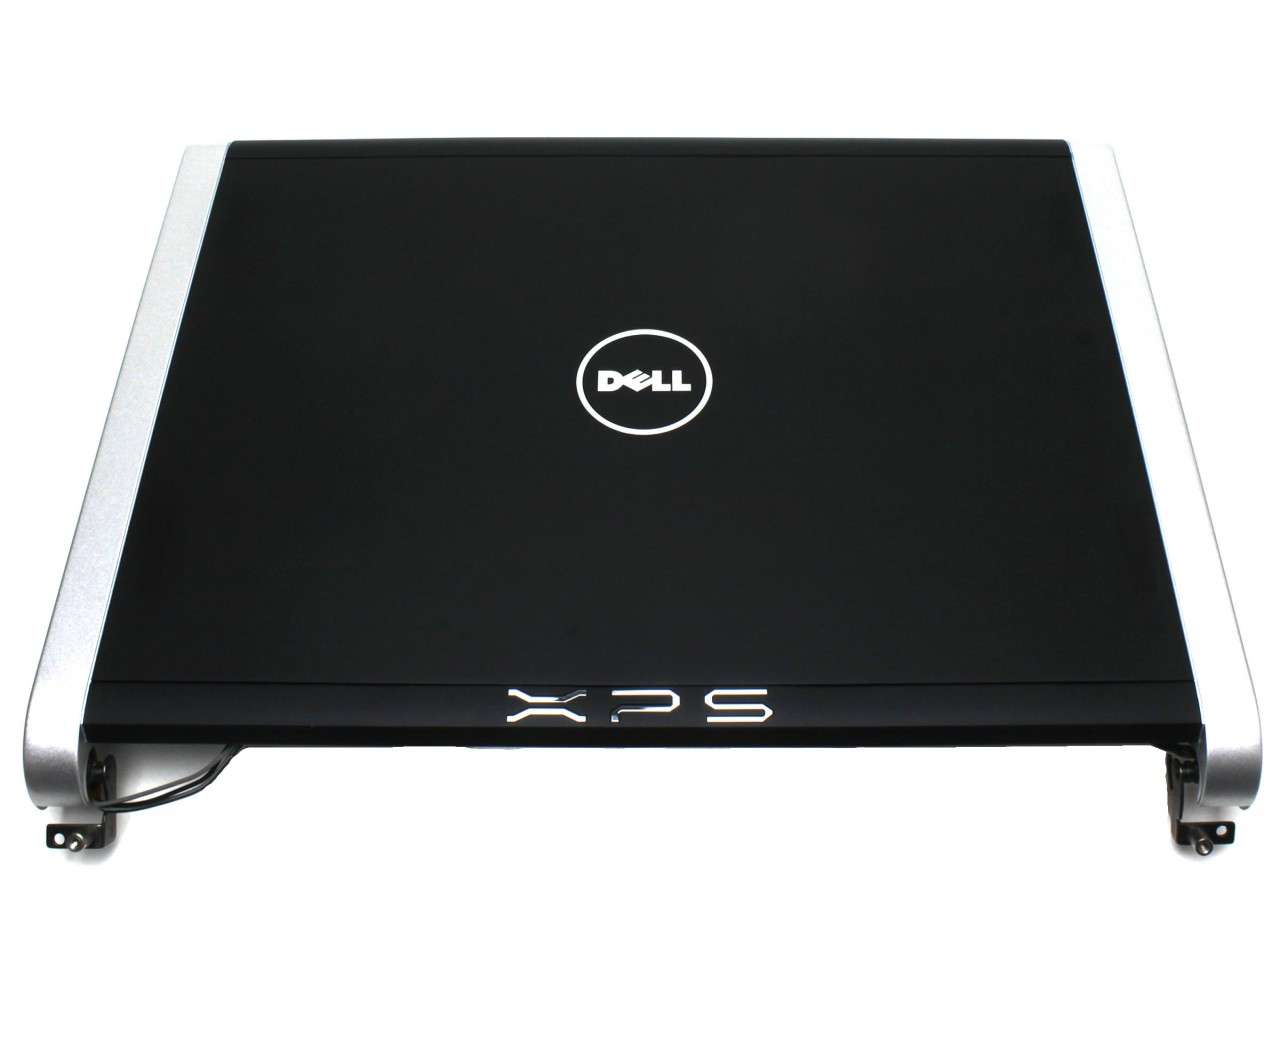 Capac Display BackCover Acer XPS M1330 Carcasa Display Neagra DELL imagine noua reconect.ro